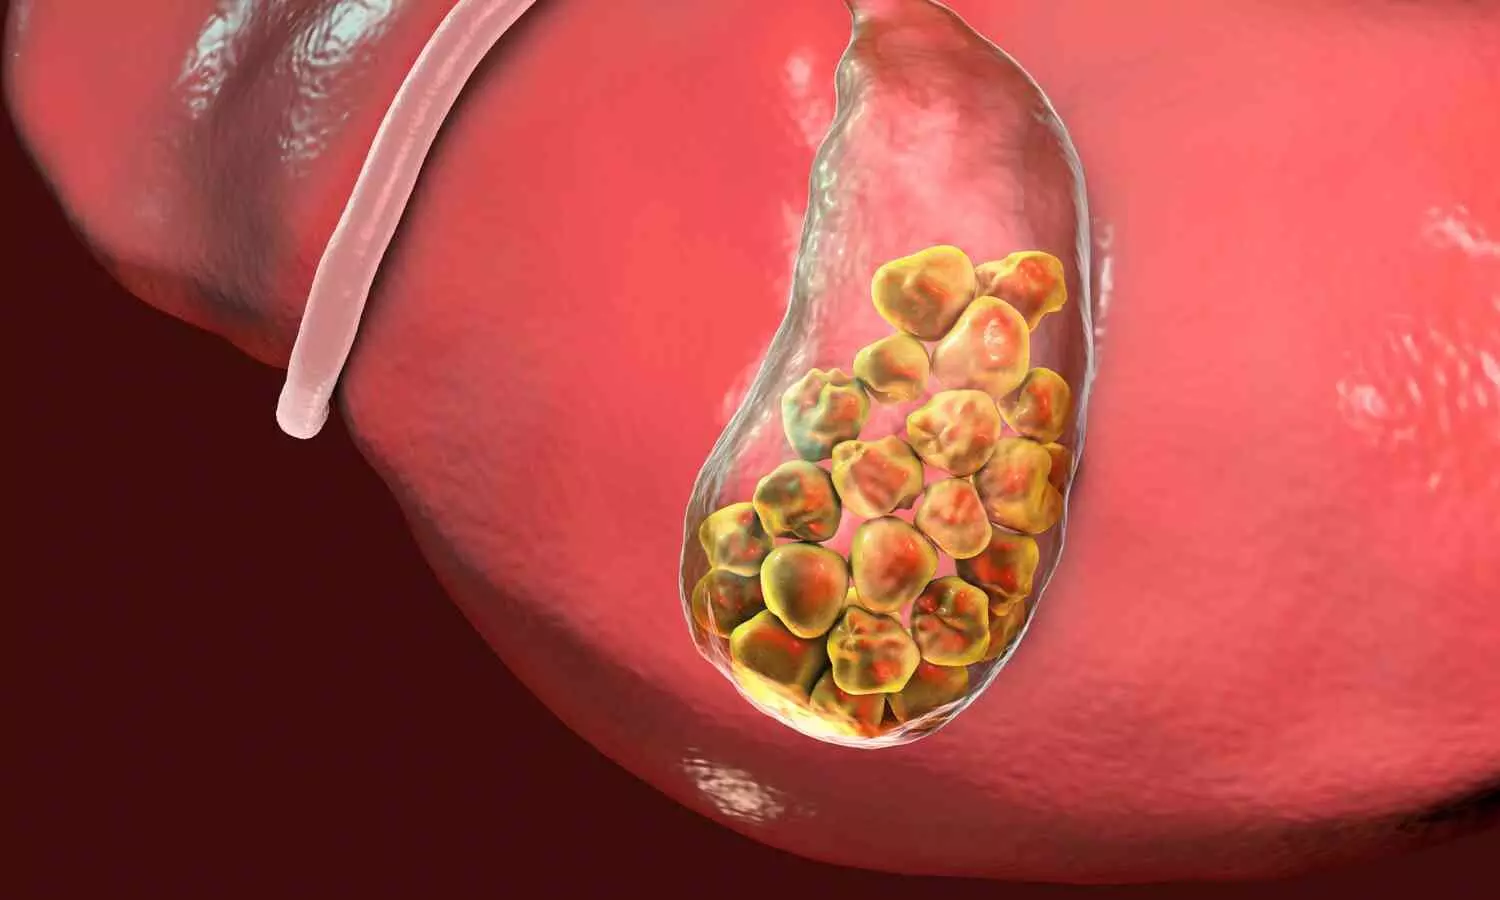 High Intake of Junk Food and Antacids Causes 1,500 Gallbladder Stones in Woman